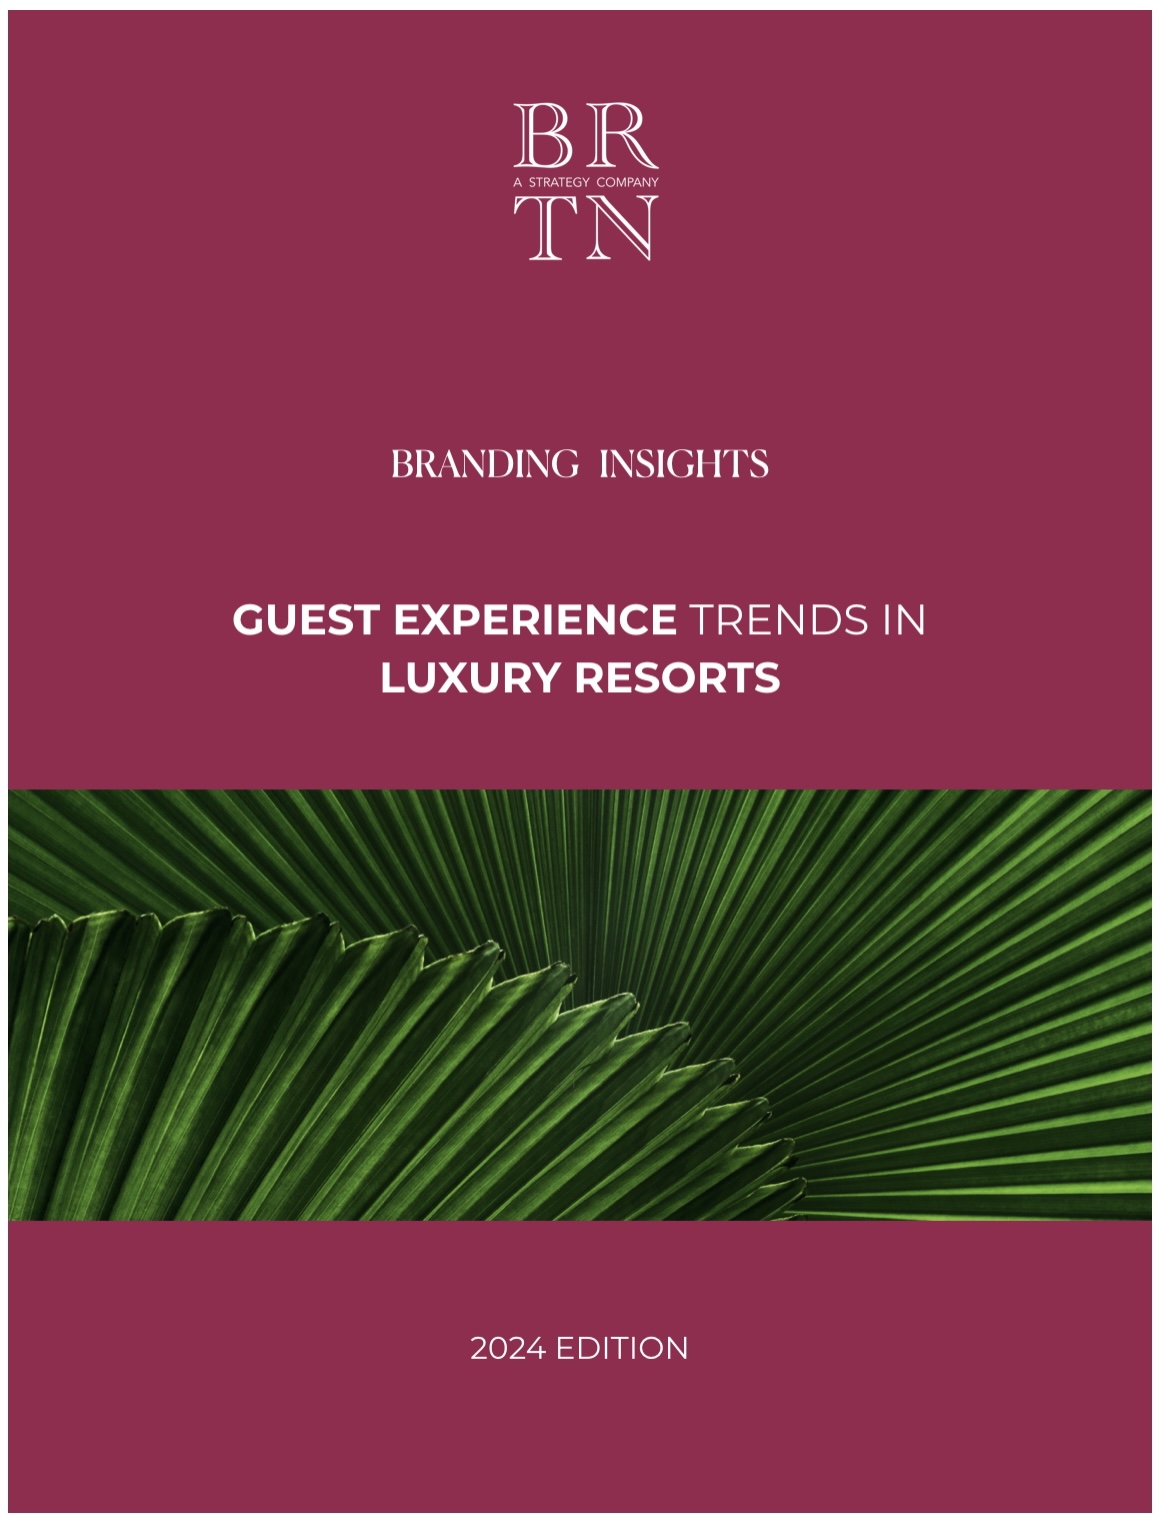 GUEST EXPERIENCE TRENDS IN LUXURY RESORTS Report 2024